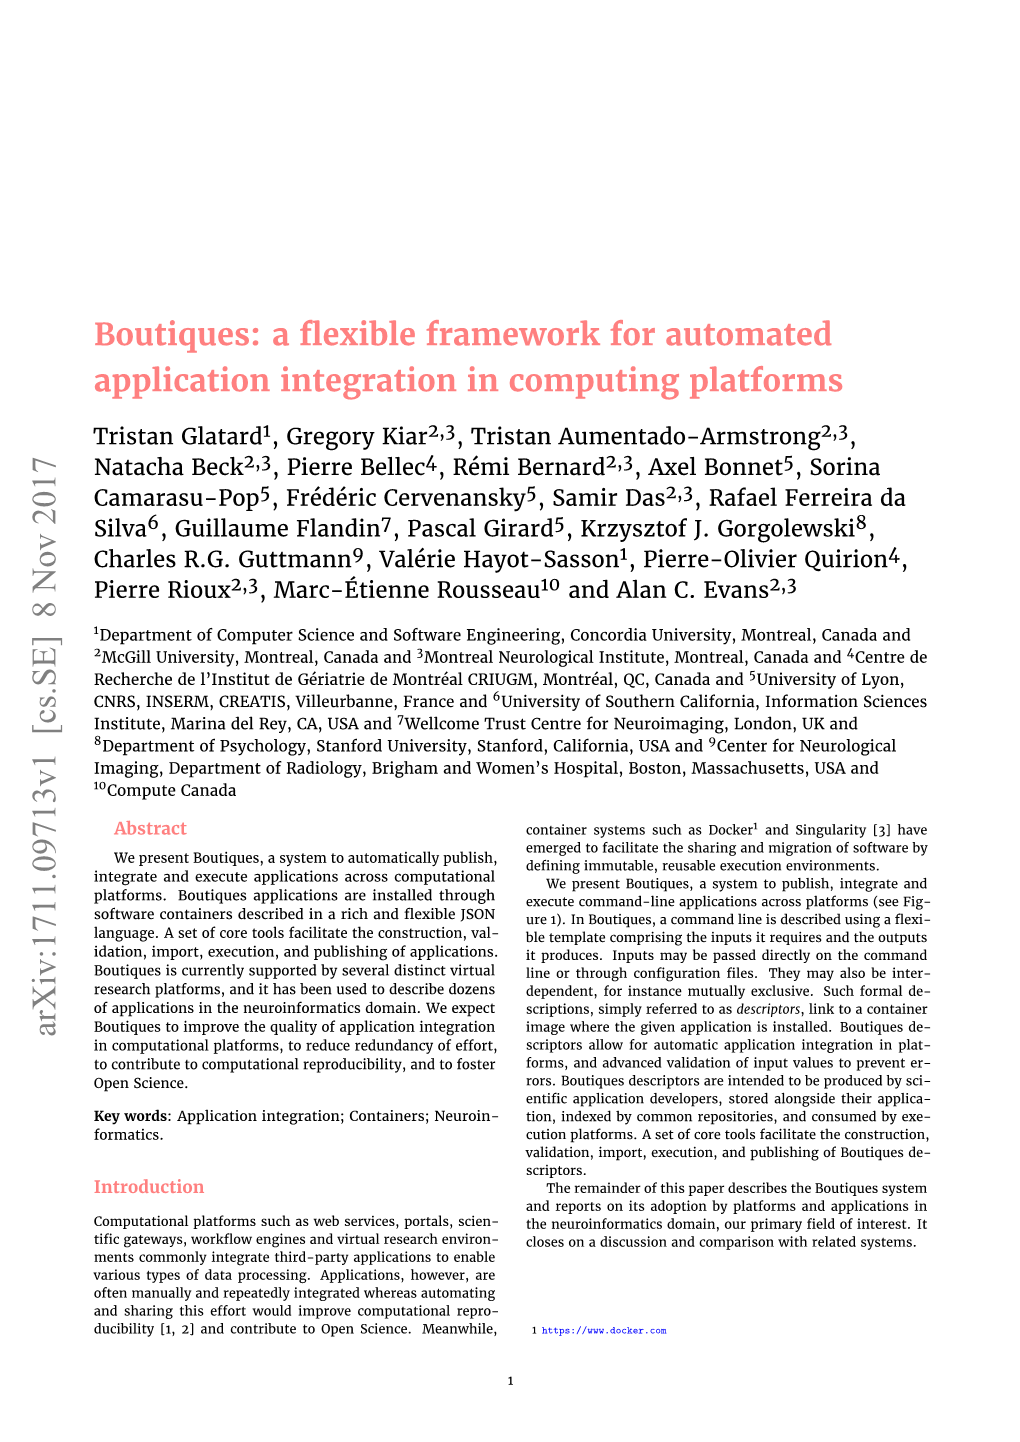 Boutiques: a Flexible Framework for Automated Application Integration In